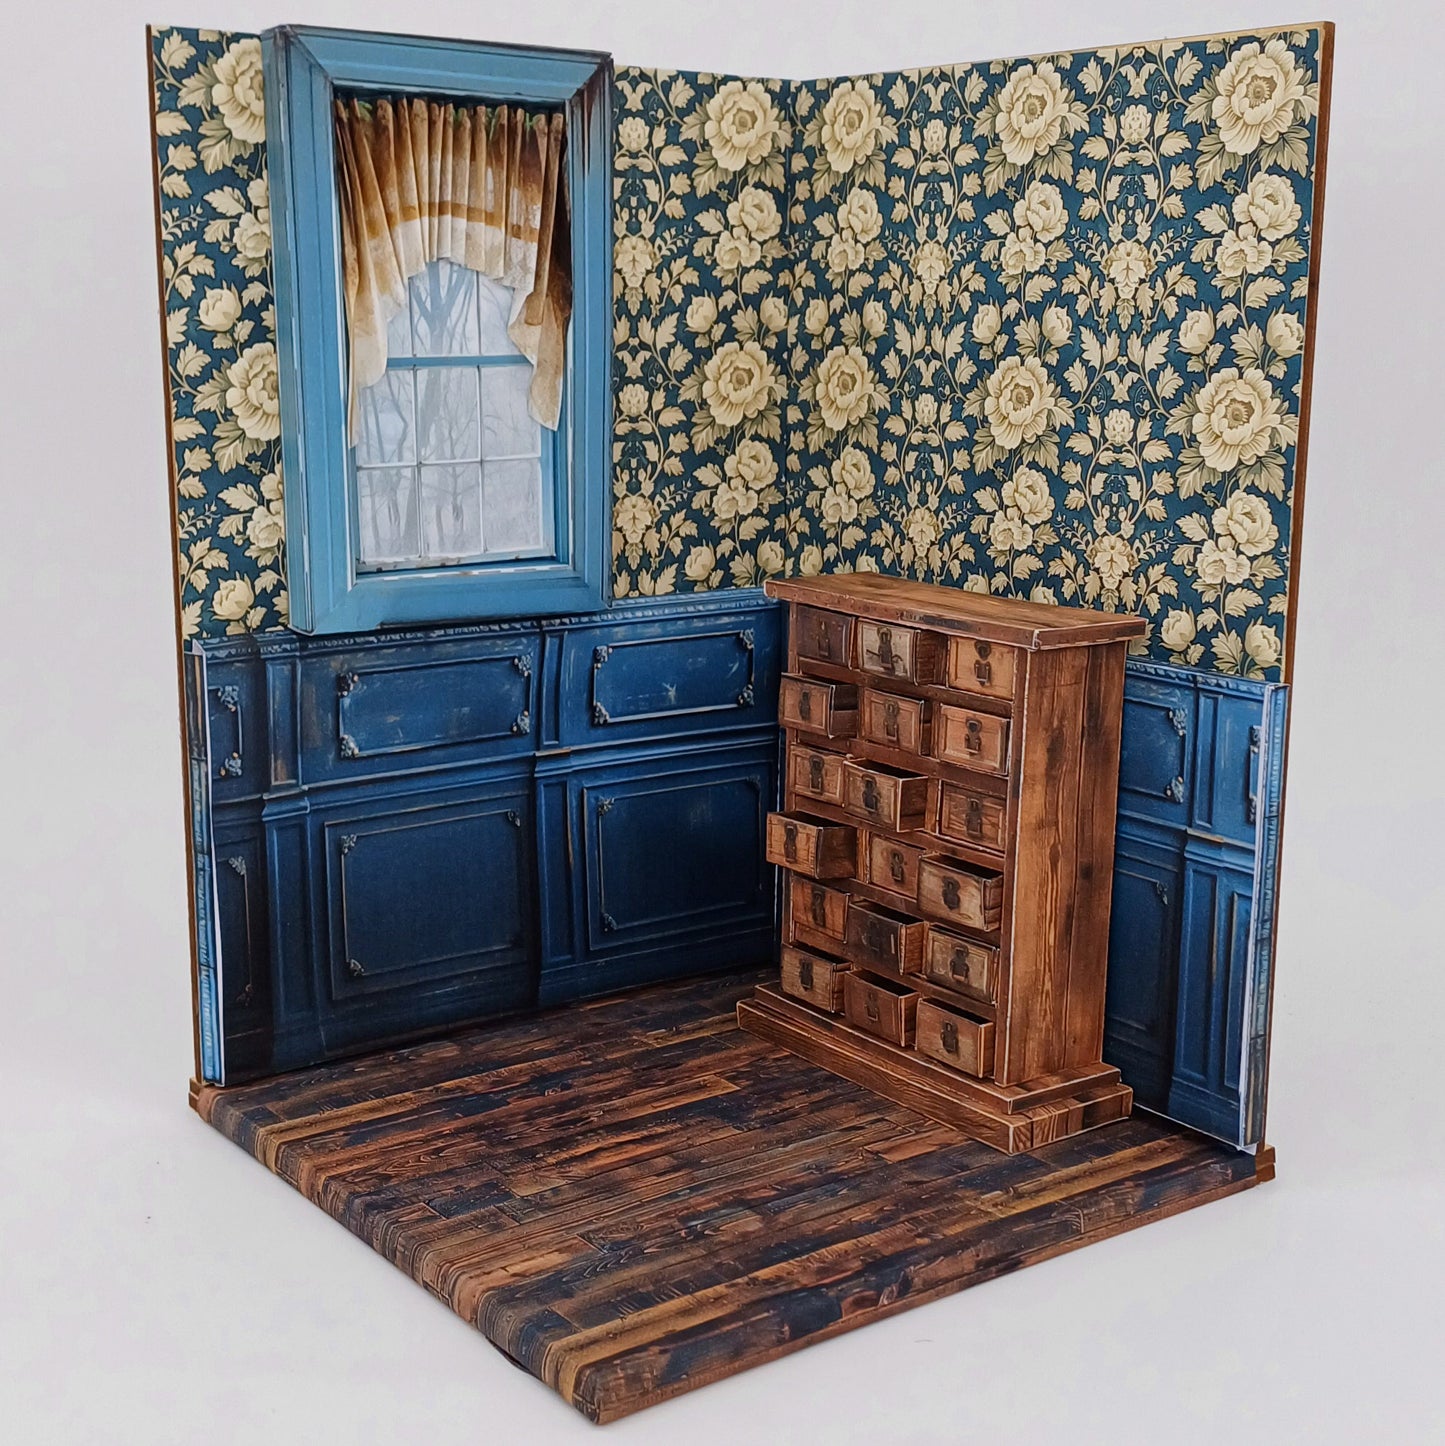 Roombox design "Blue Room" 1:12 scale for printing and handicrafts